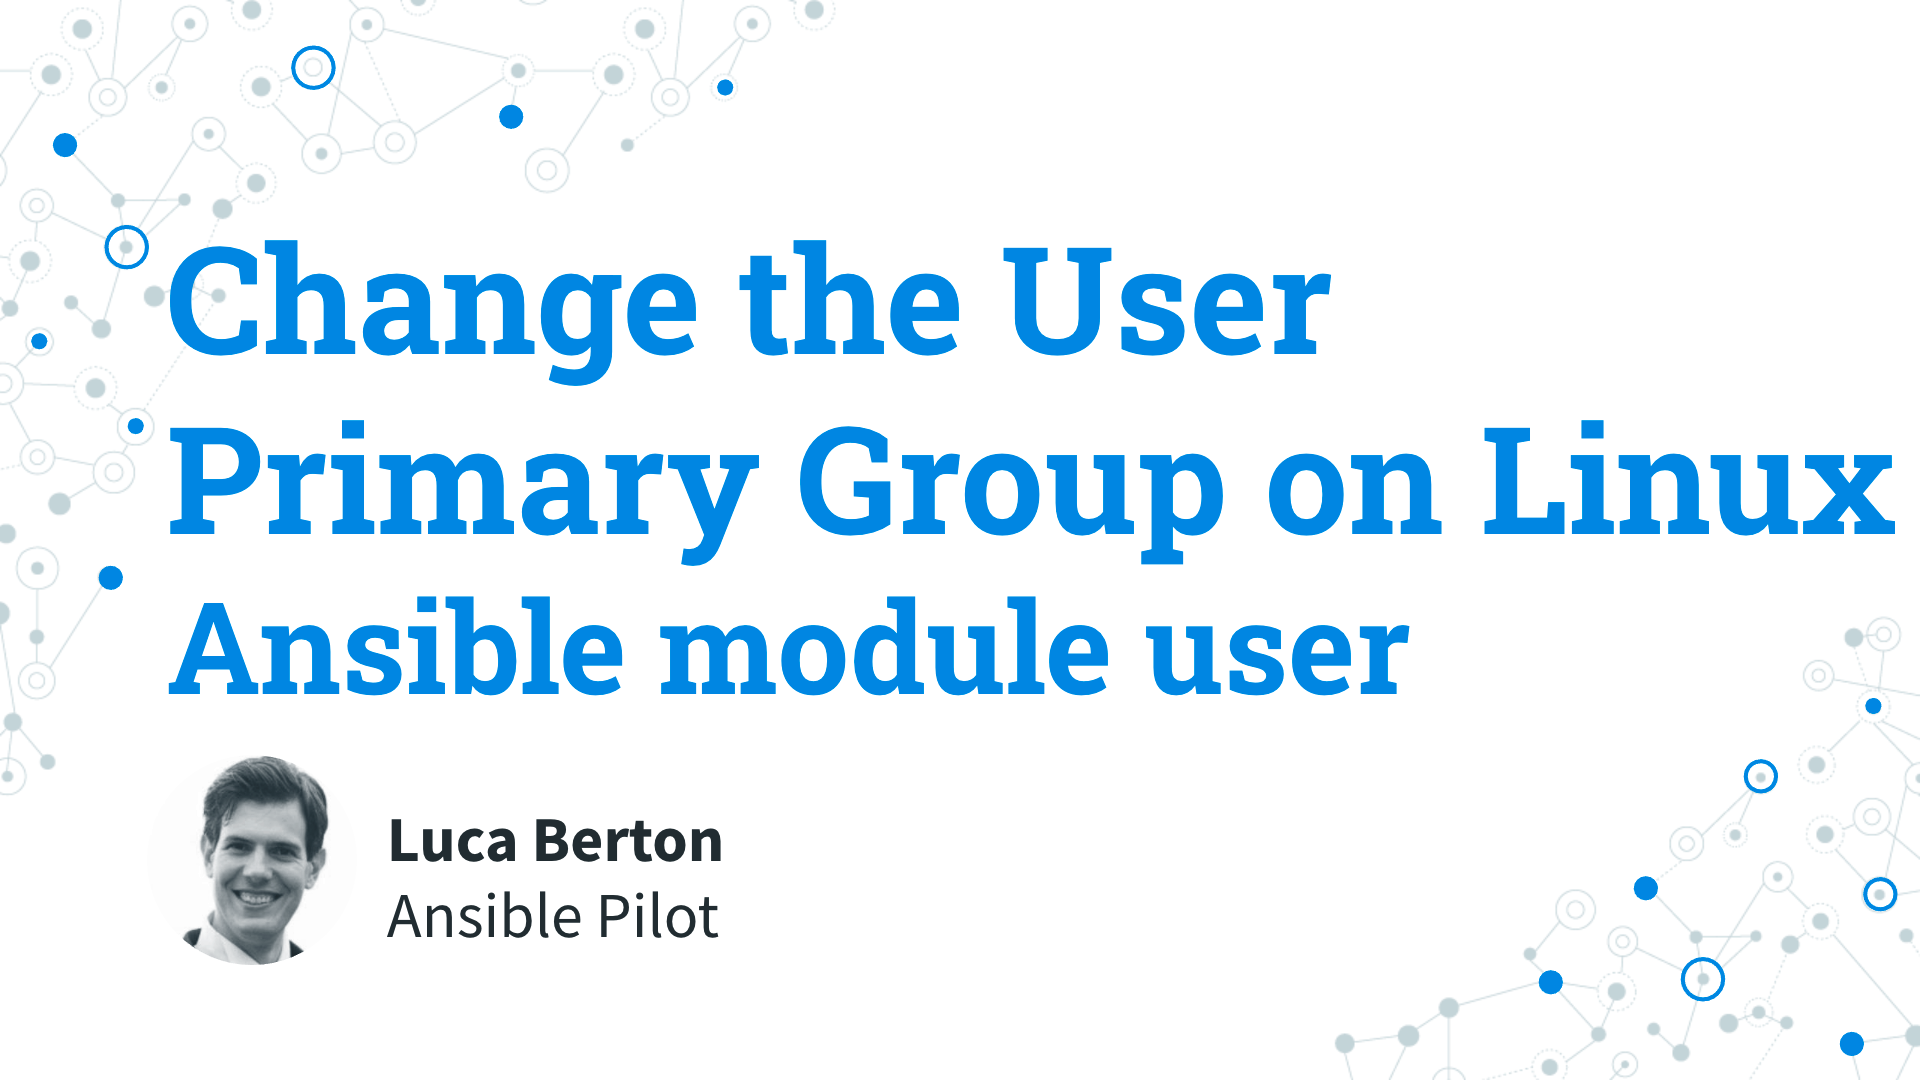 Change the User Primary Group on Linux - Ansible module user